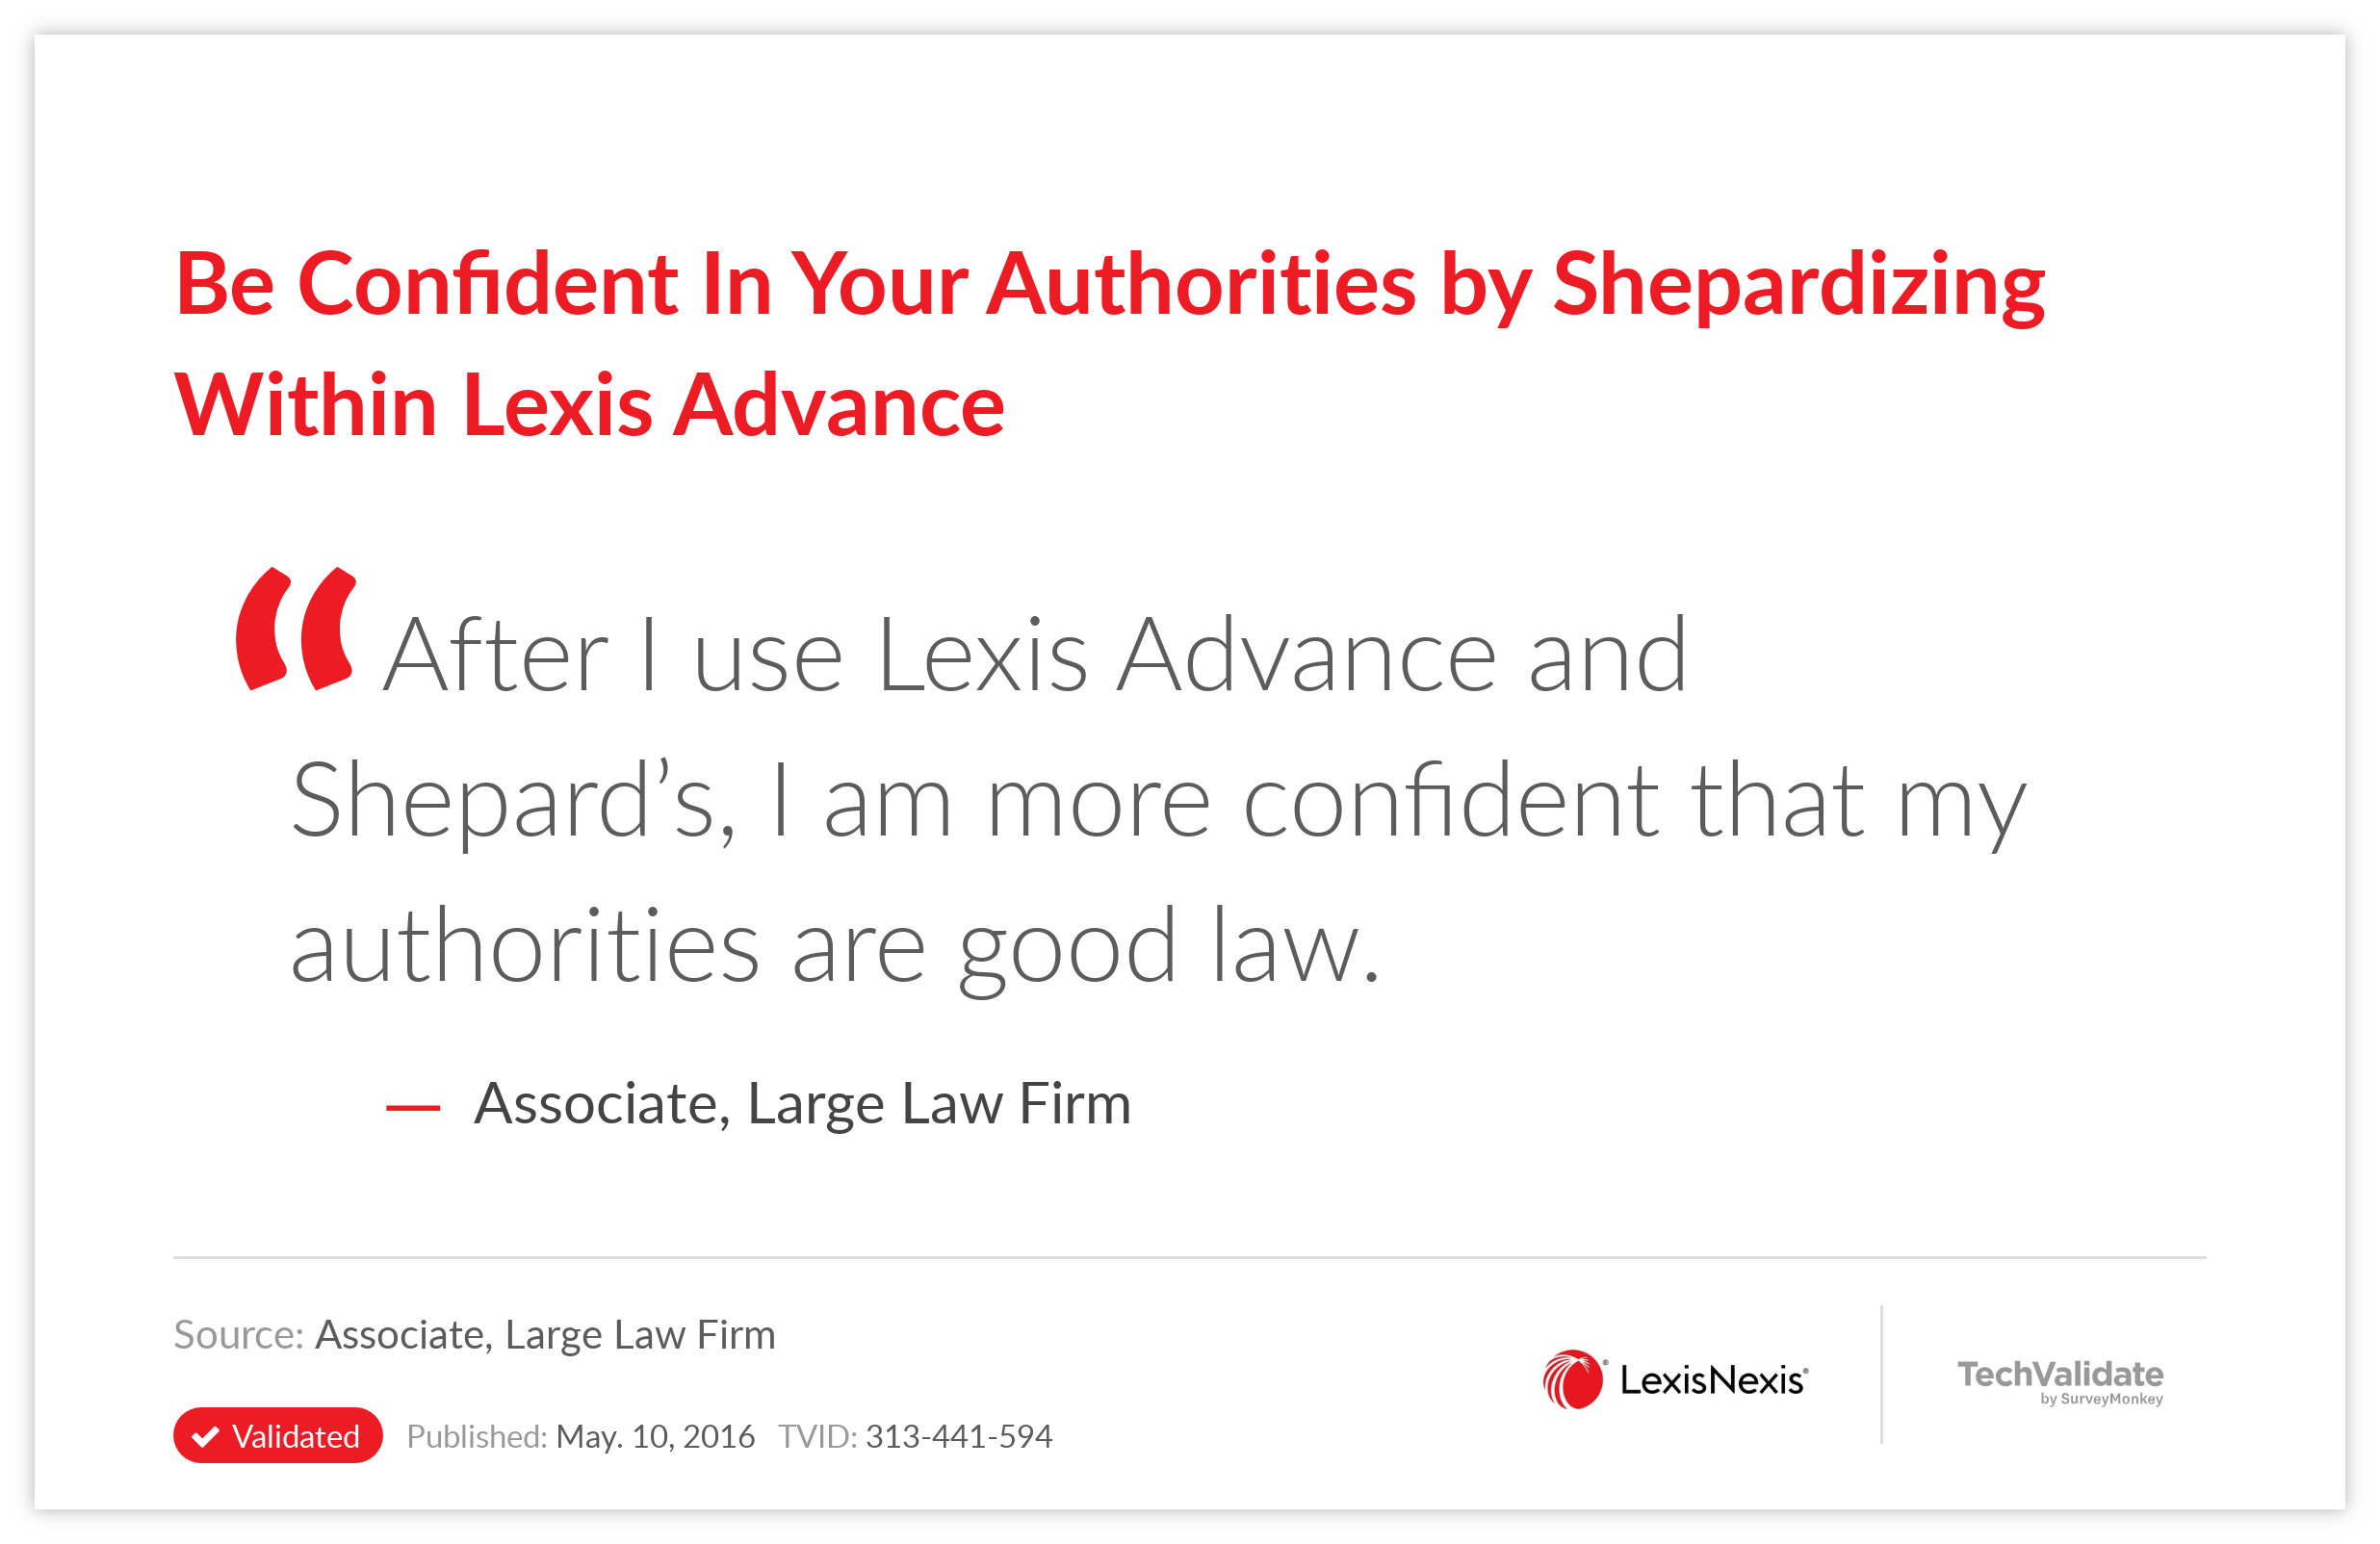 Be Confident In Your Authorities by Shepardizing Within Lexis Advance